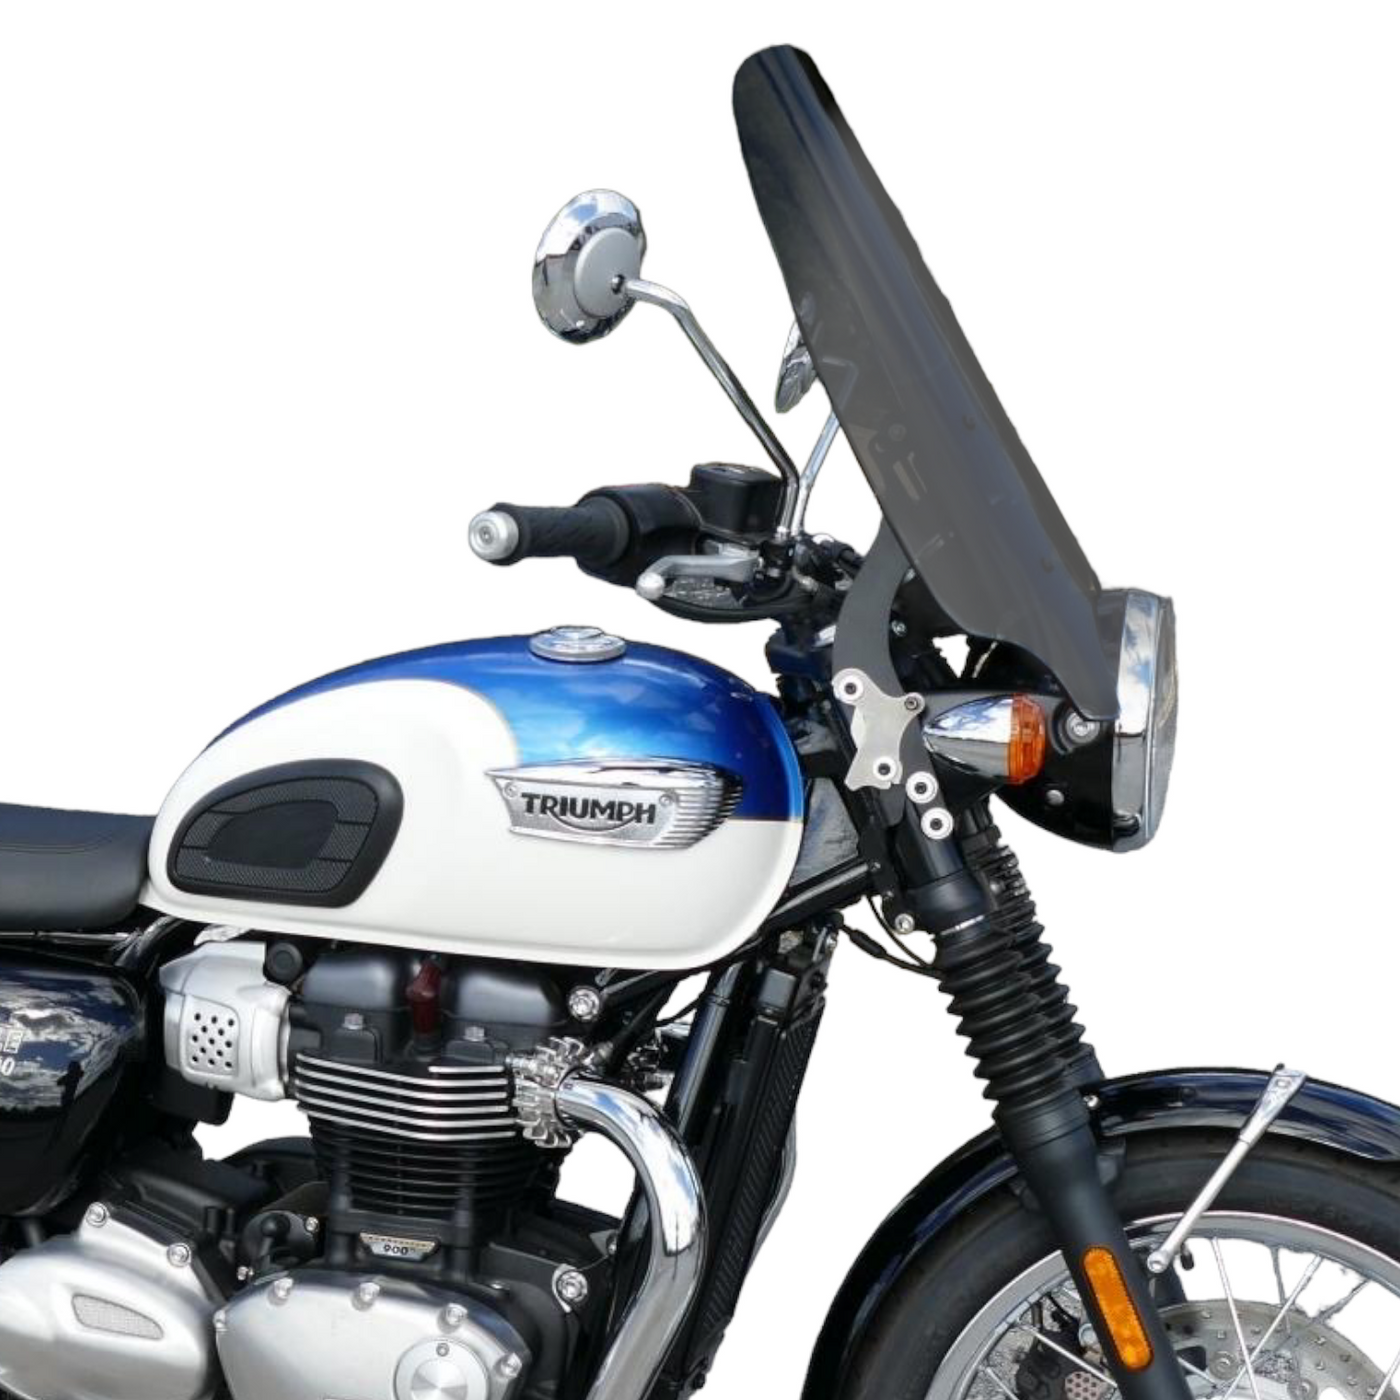 CERTIFIED PRE-OWNED - 18" Clear Adjustable Windshield System for Triumph Bonneville T120 (2016 & up)